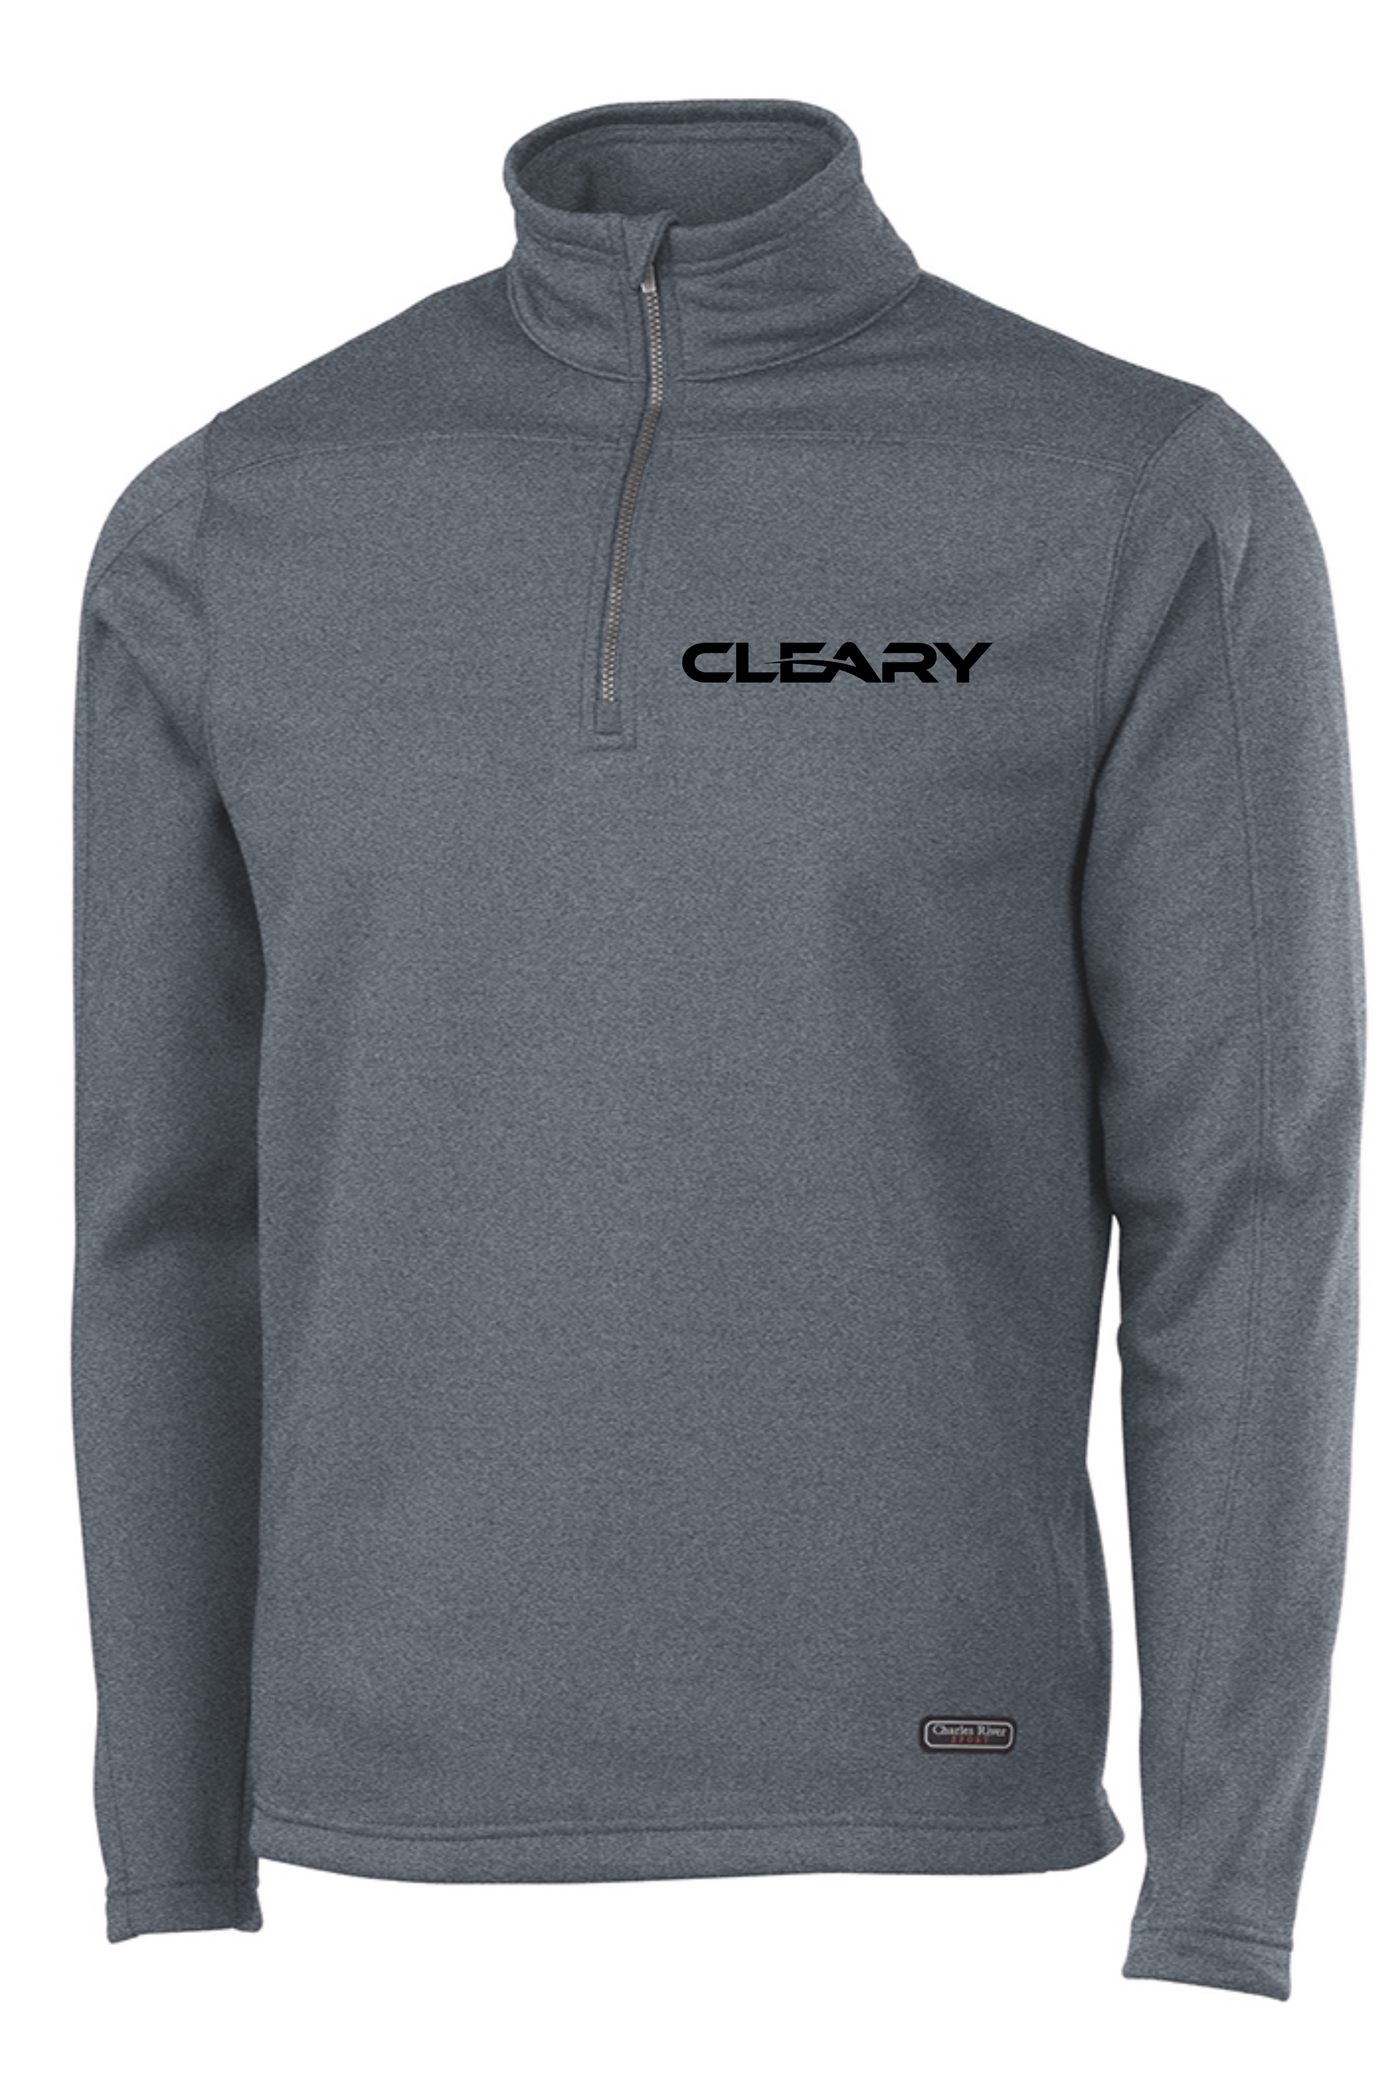 Cleary's Stealth Zip Pullover Charcoal Heather